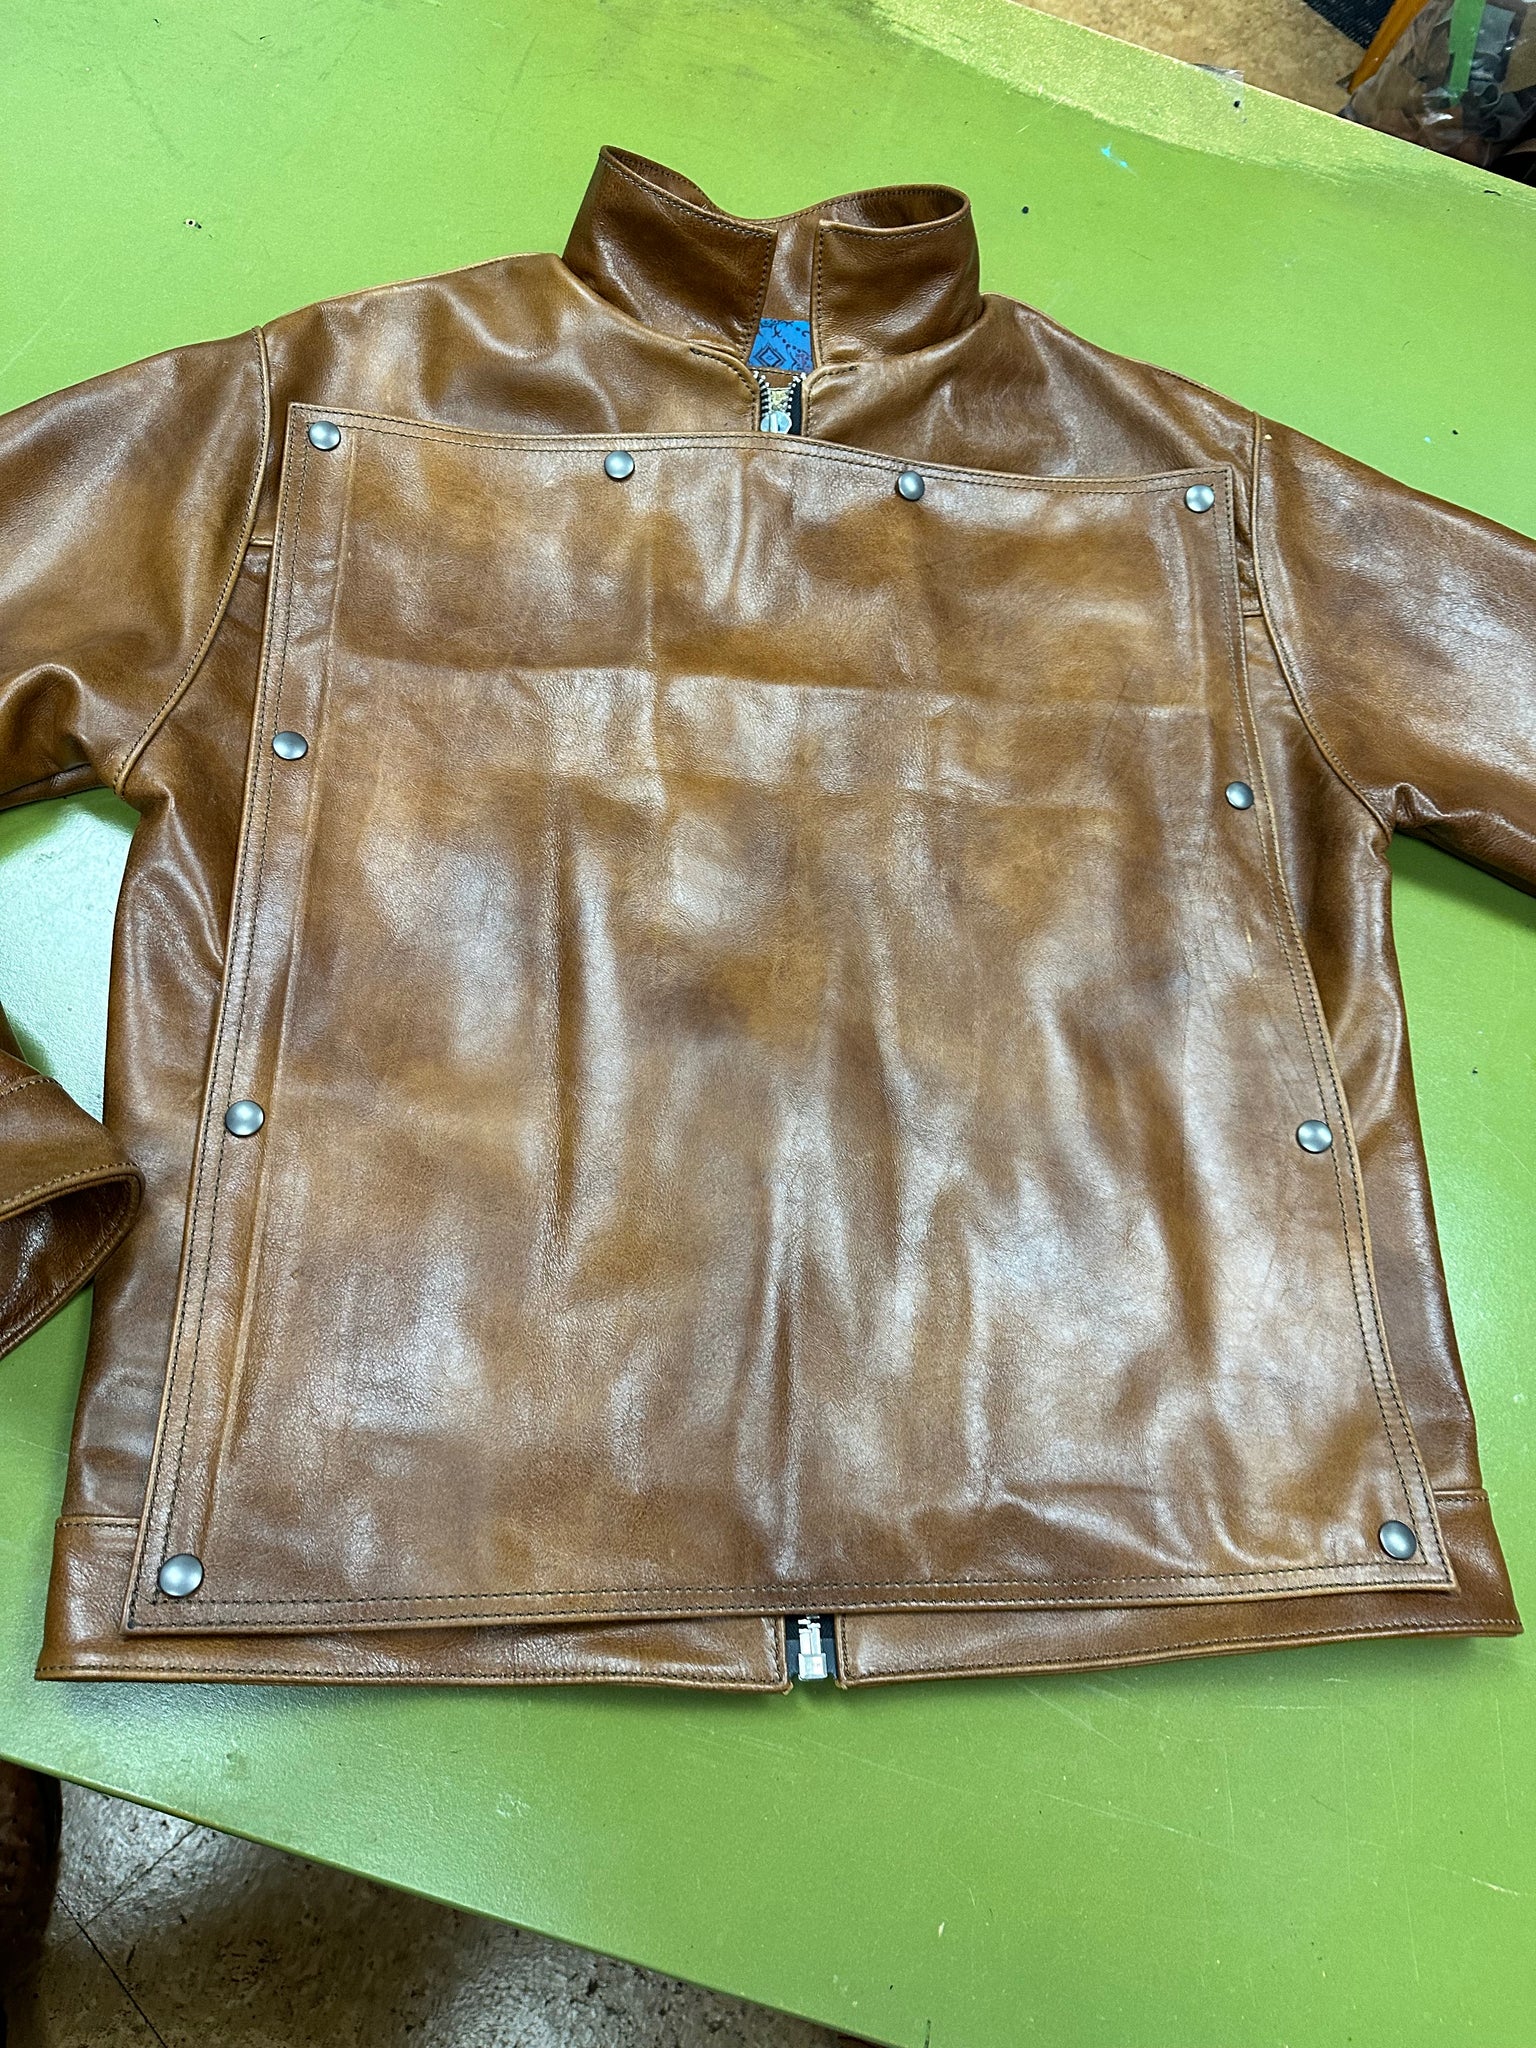 The Rocketeer leather jacket